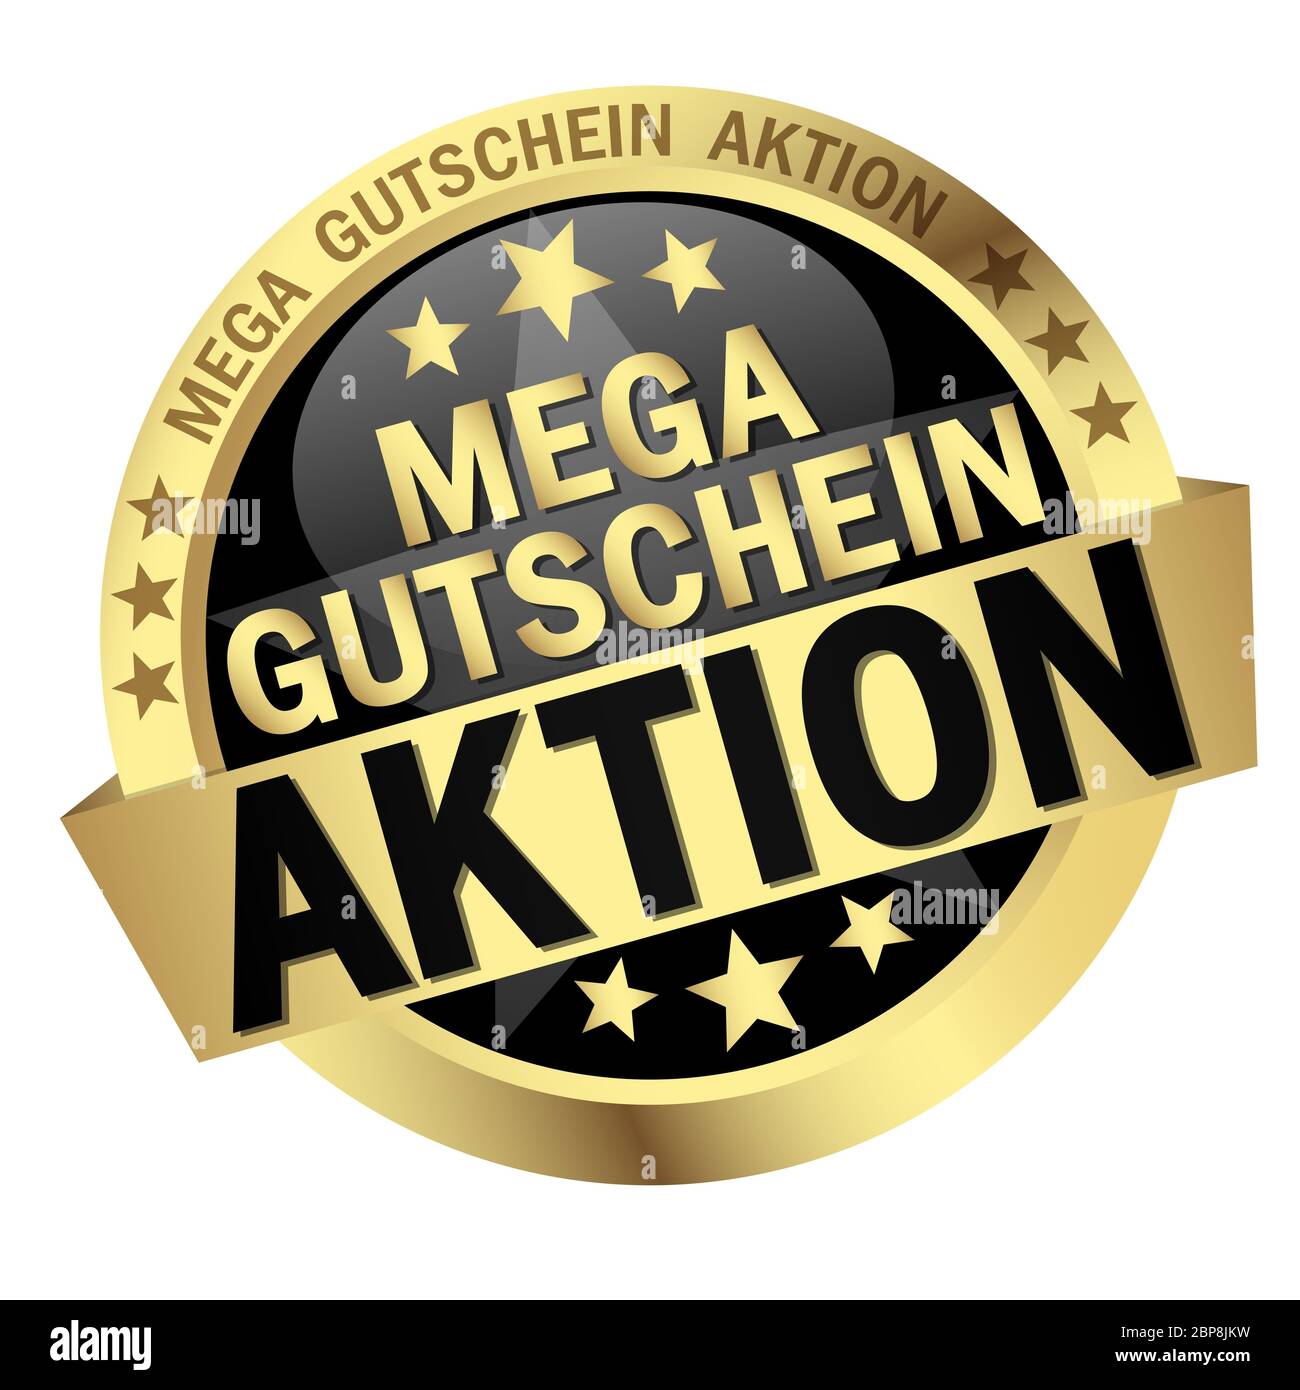 colored button with banner and text - Mega Gutschein Aktion Stock Photo